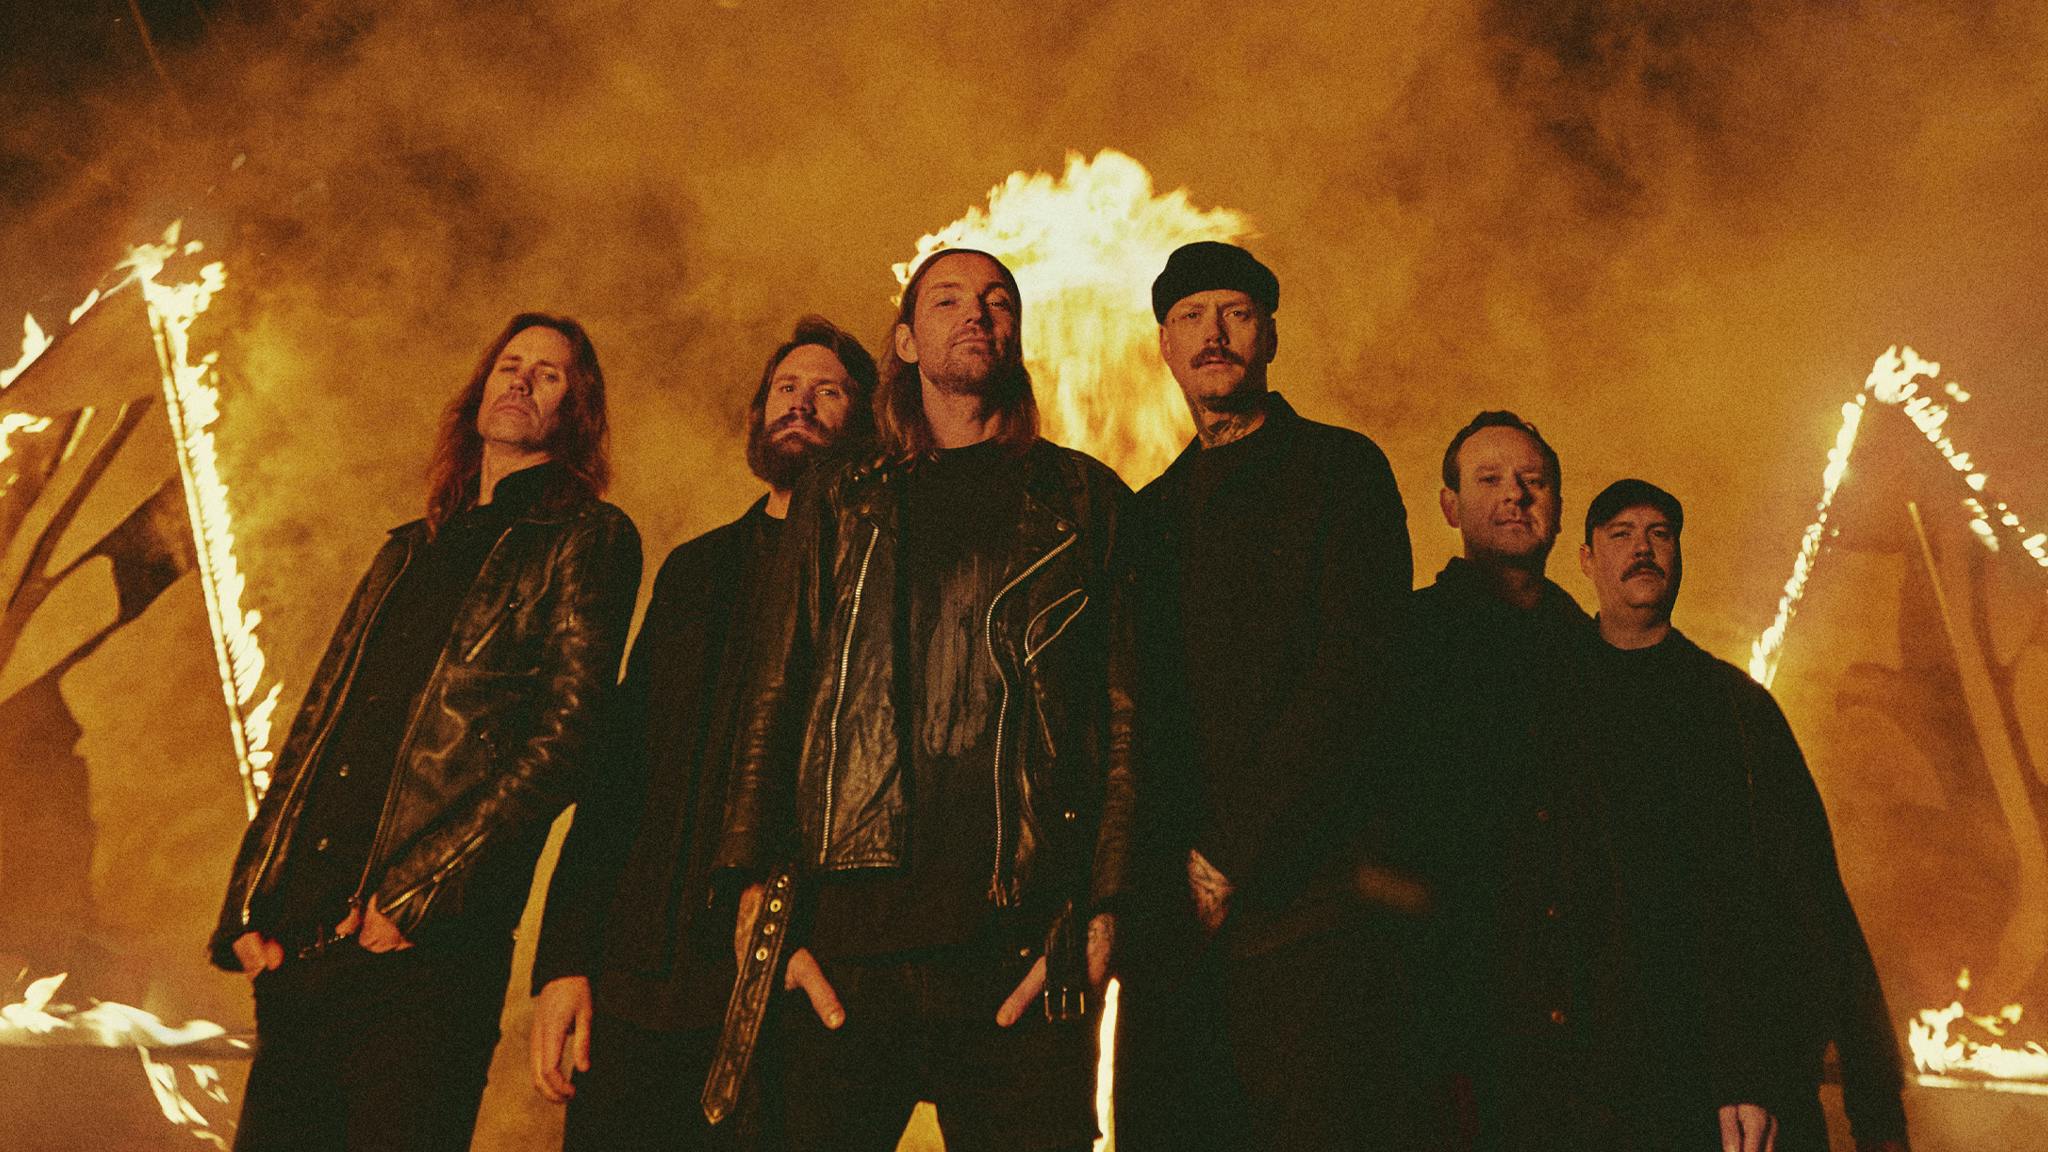 Kvelertak: “This isn’t about Vikings, this is the history of the actual place that we are from”